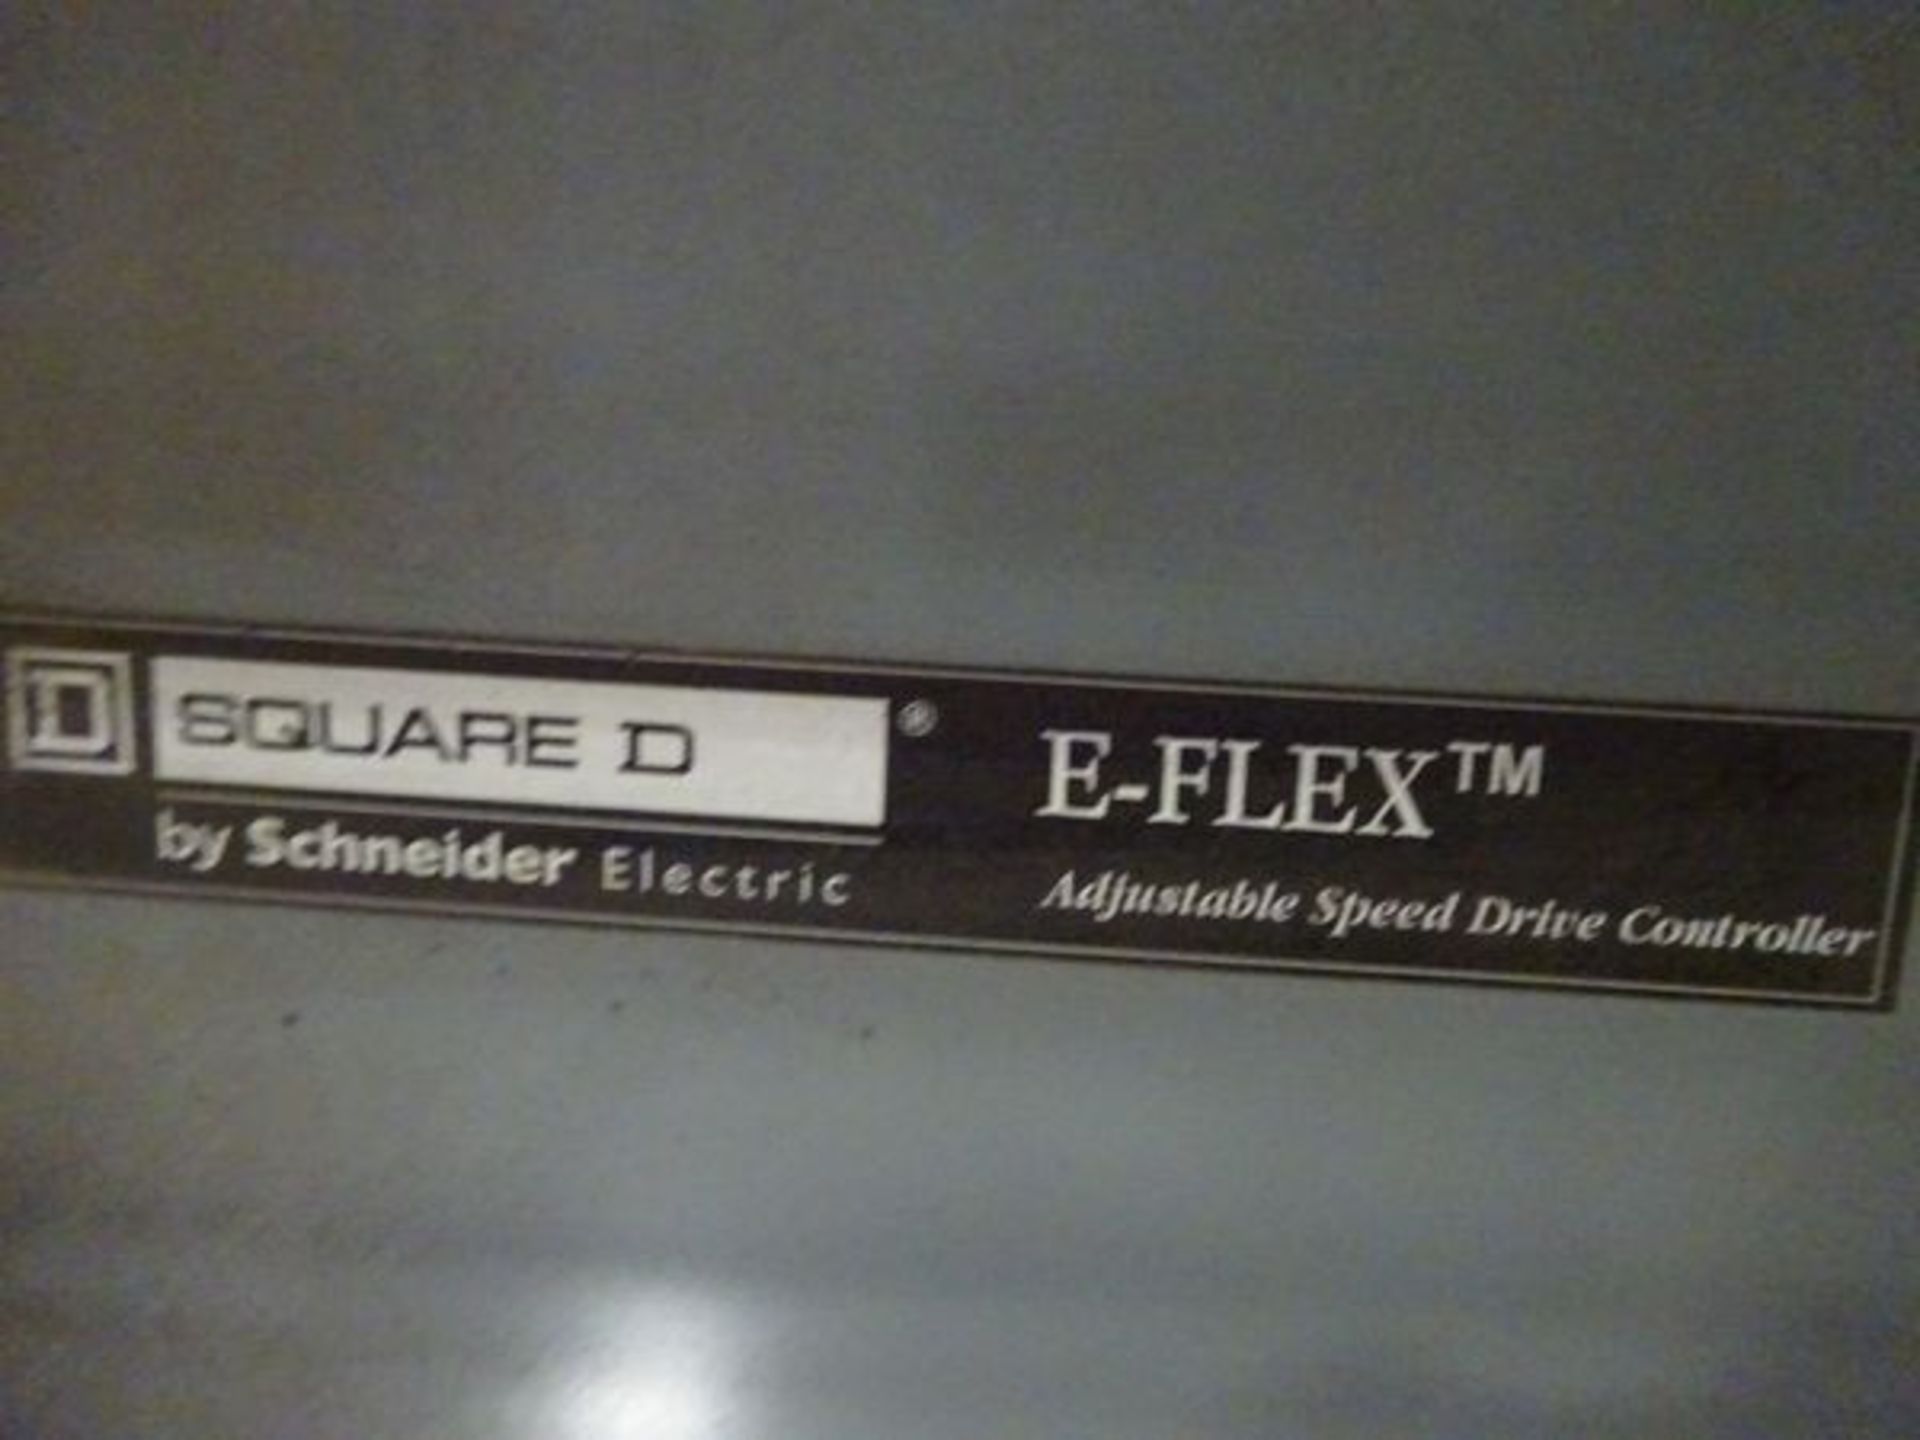 Schneider Square D E Flex adjustable speed drive controller, new and still in original crate - Image 2 of 5